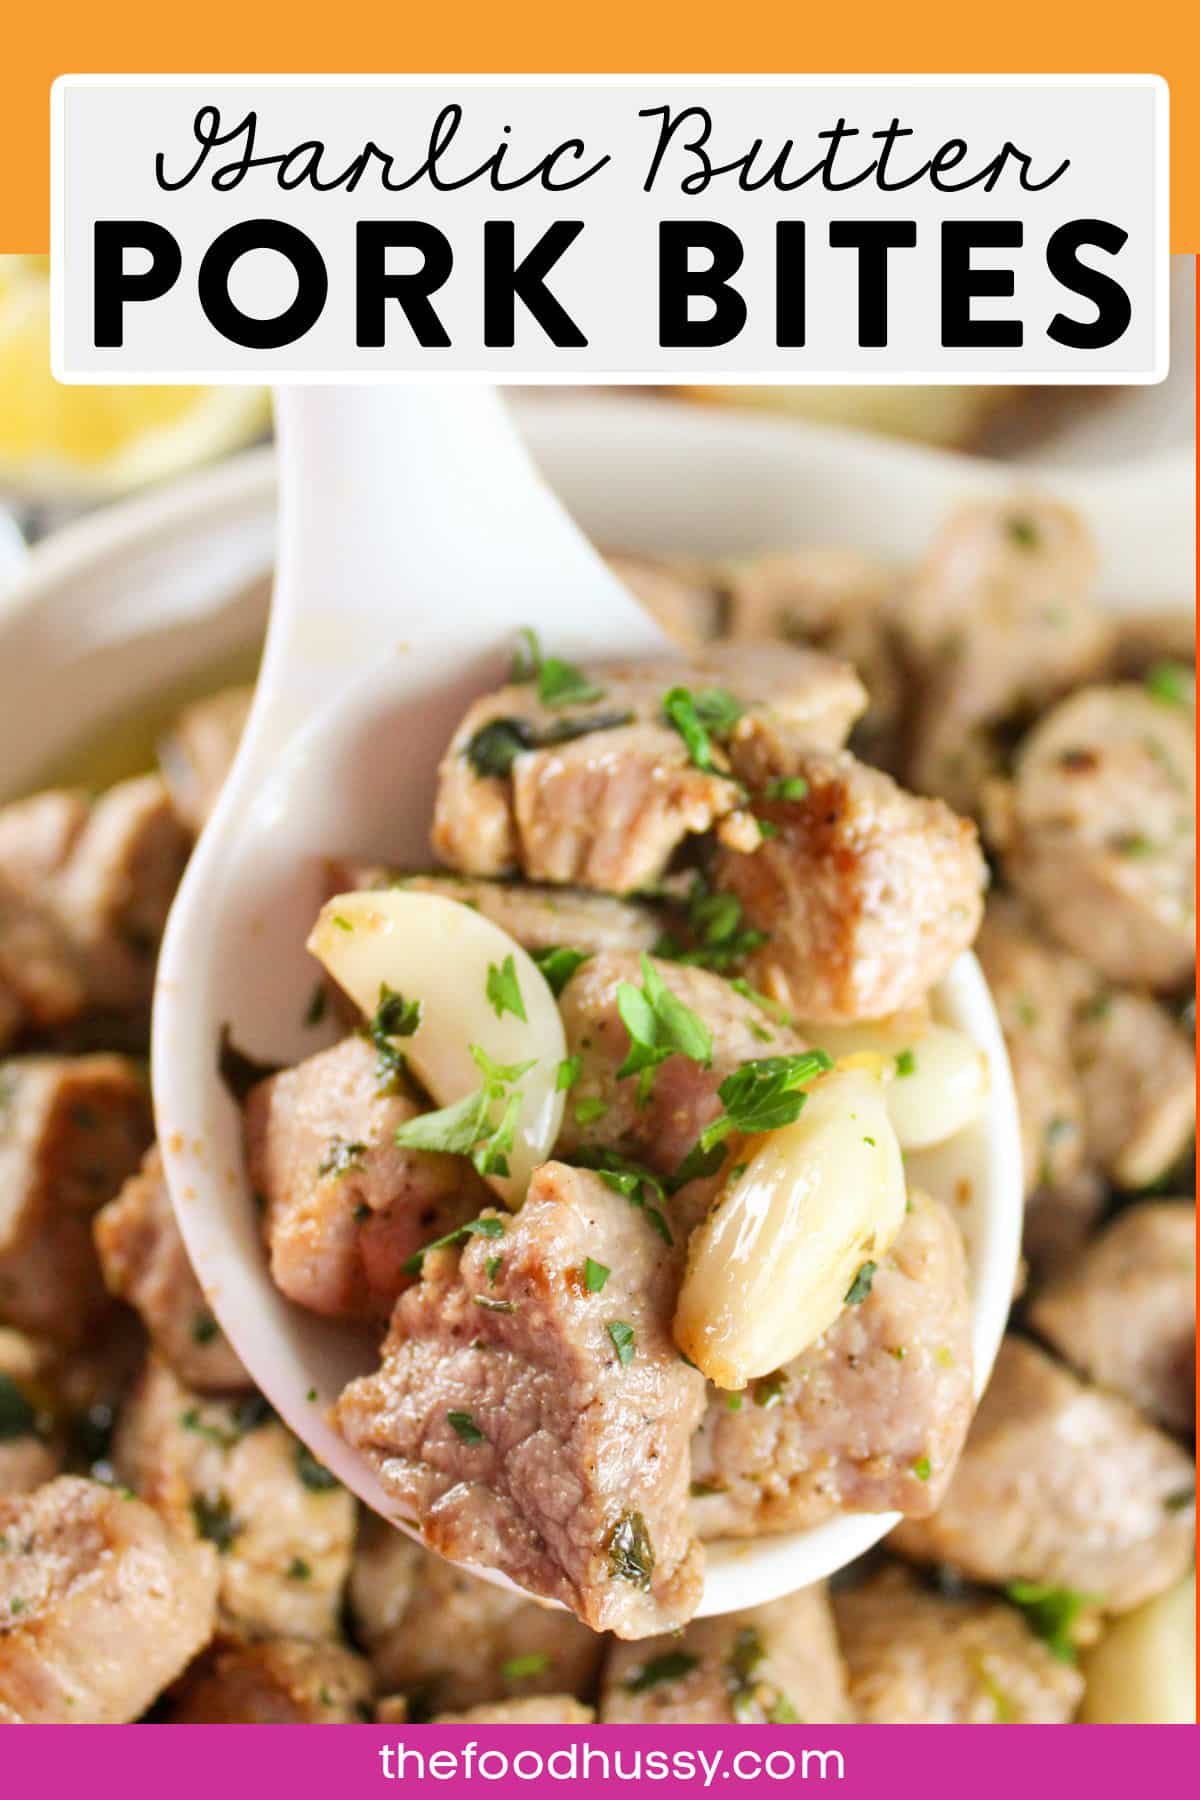 Garlic Butter Pork Bites are so easy to make and wow - they are delicious! Tender, juicy bites of pork smothered in a garlic butter sauce. Fresh herbs and lemon add freshness to every bite! via @foodhussy